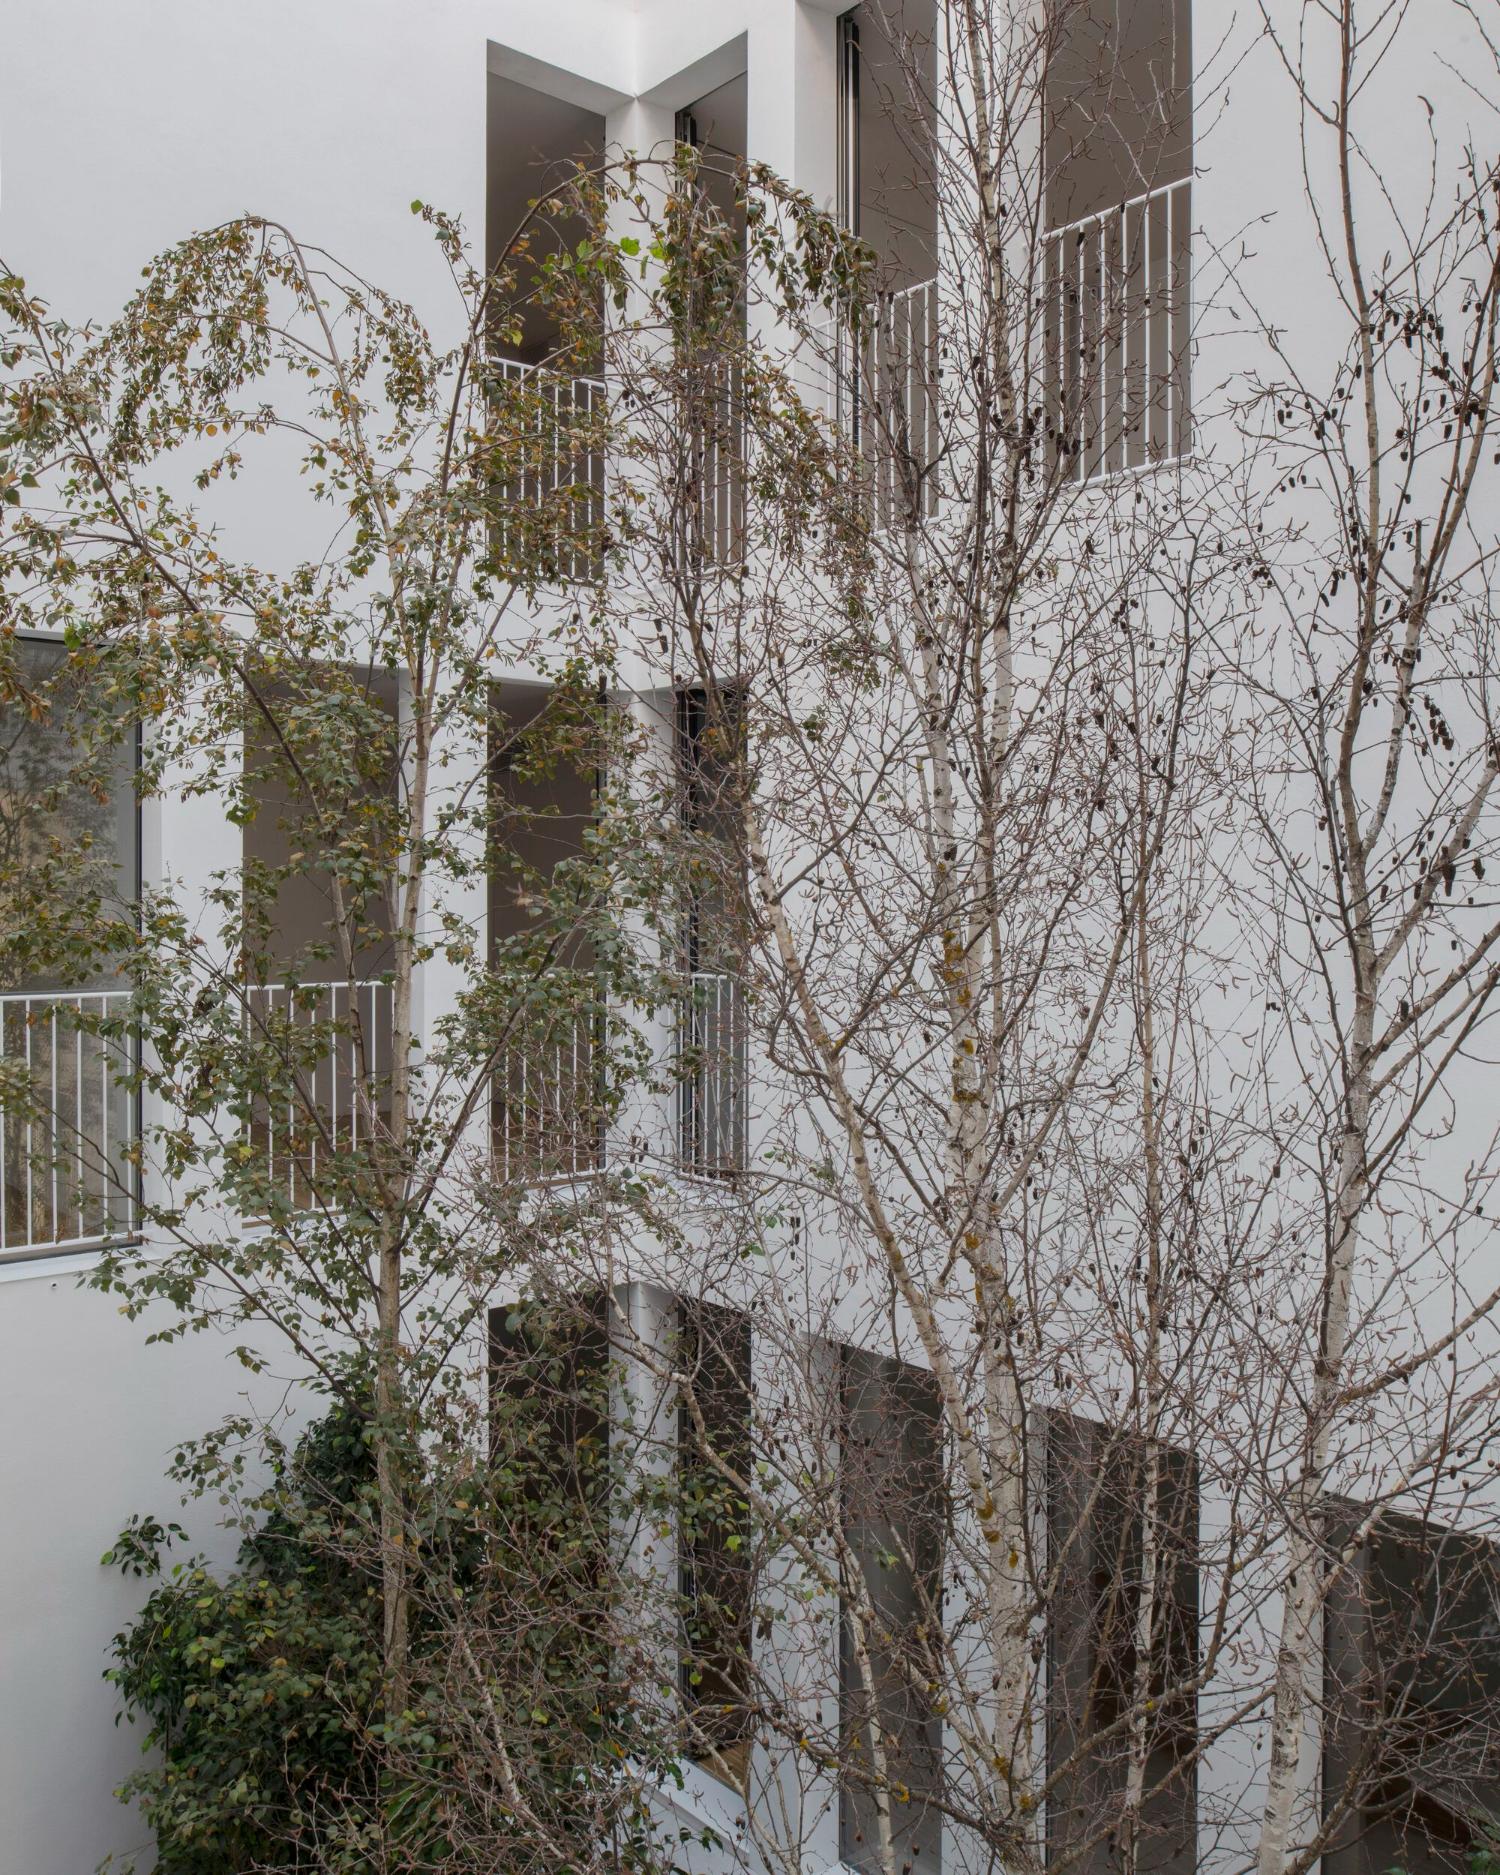 Residential Building around a Patio in Barcelona by ARQUITECTURA-G